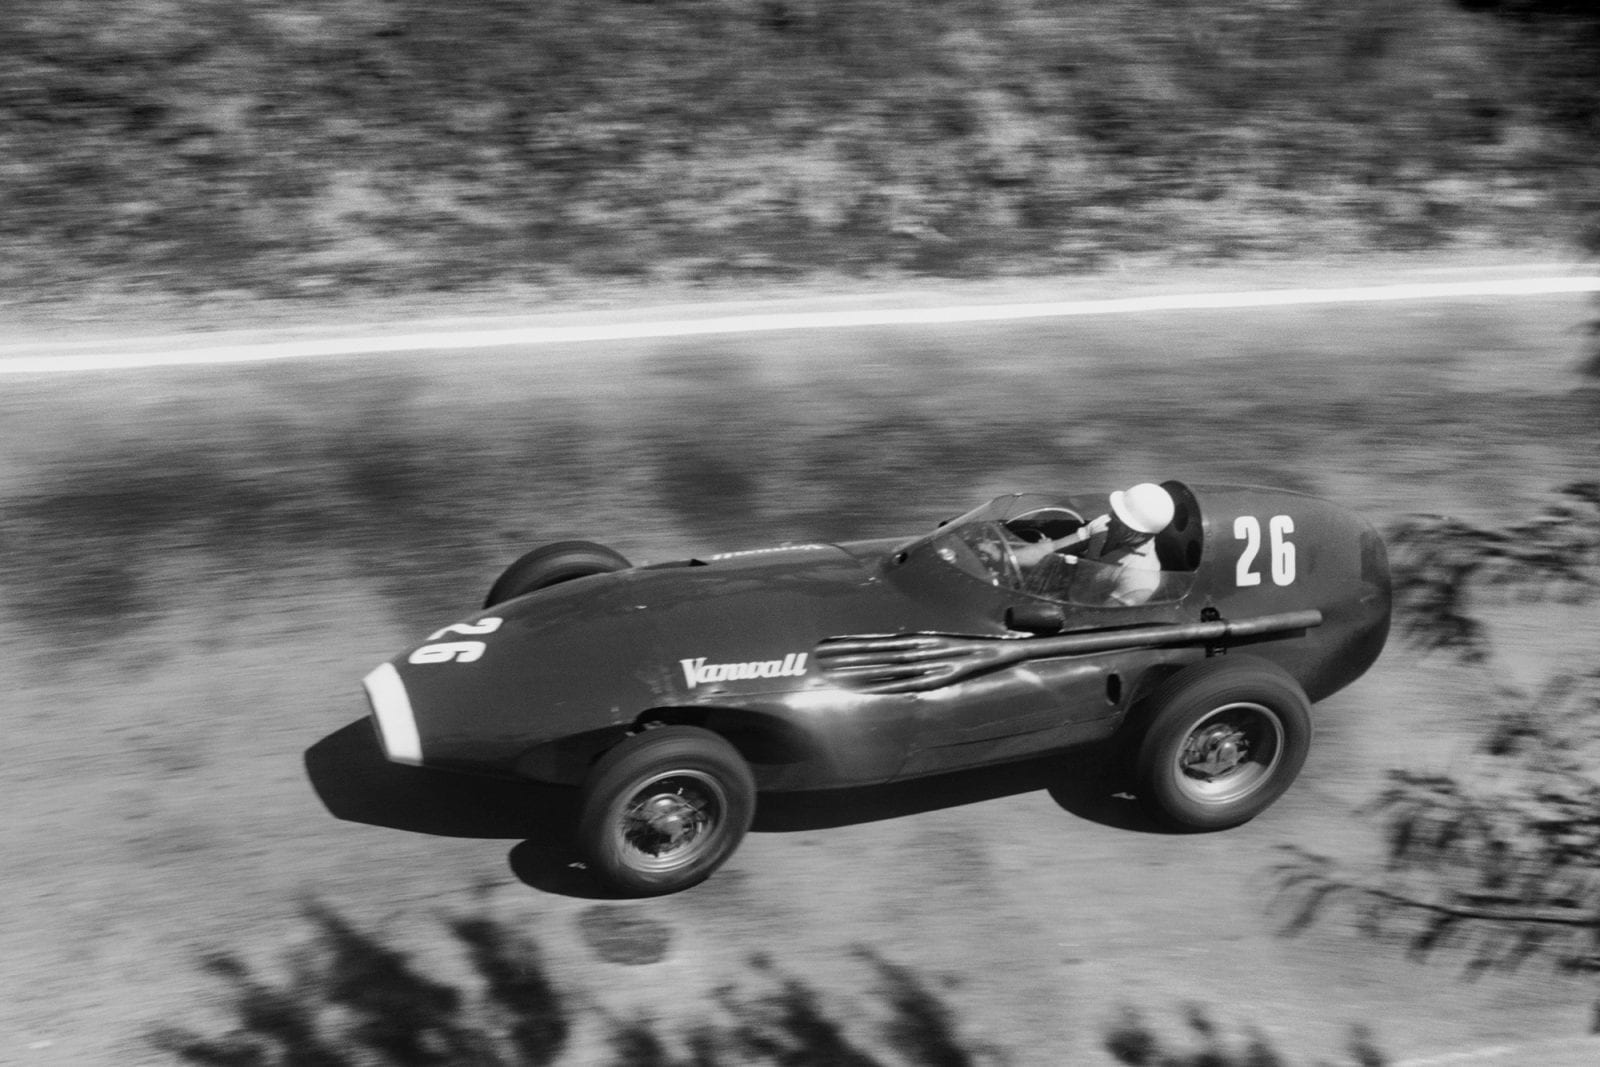 Stirling Moss (Vanwall VW5) on his way to victory at the 1957 Pescara Grand Prix.